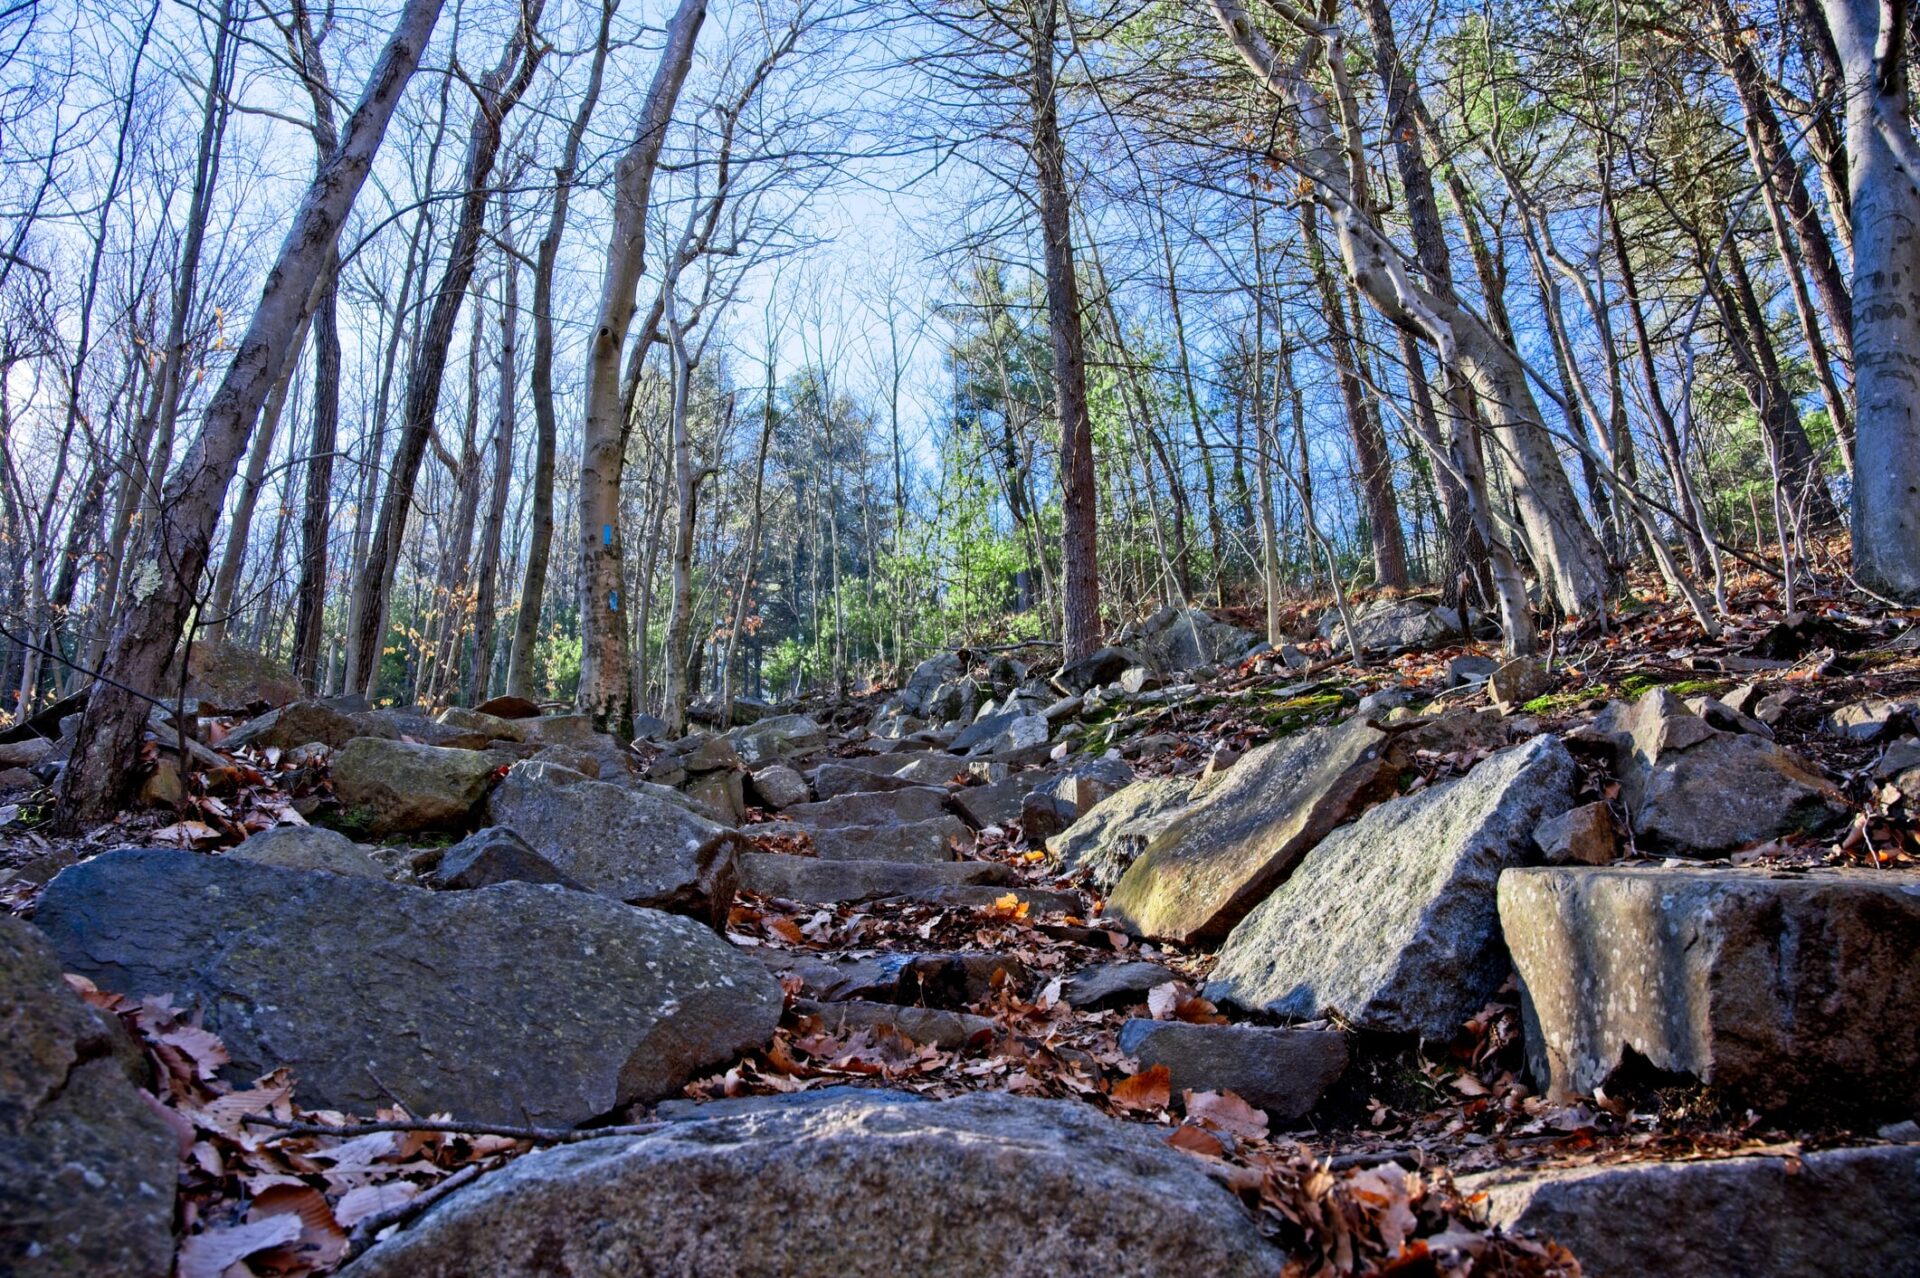 The woodland trails surrounding the Ridge Recovery Center.